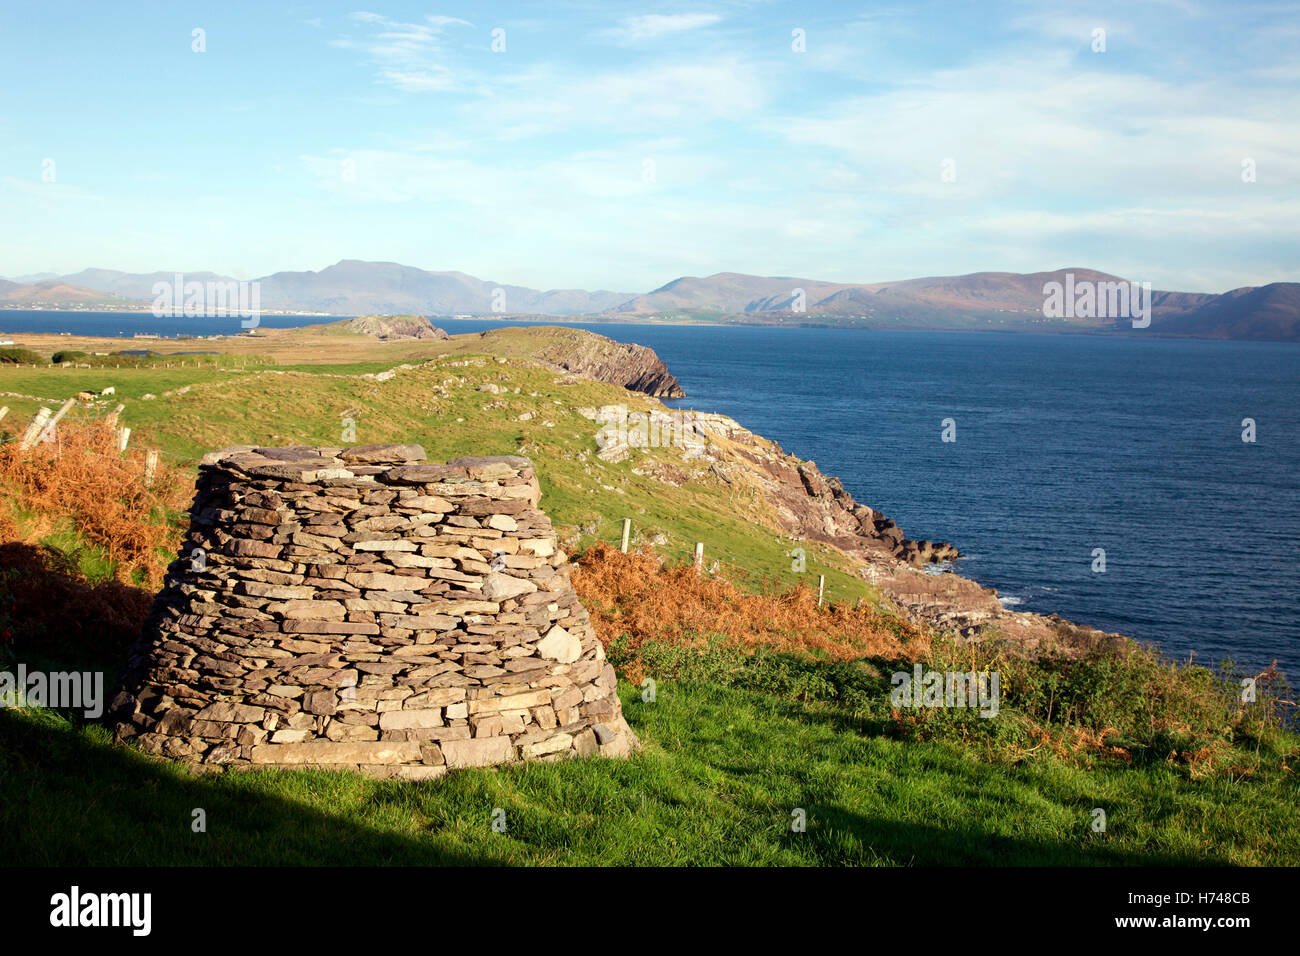 Drystone shelter in Cill Rialaig, overlooking the Atlantic Ocean, County Kerry Stock Photo